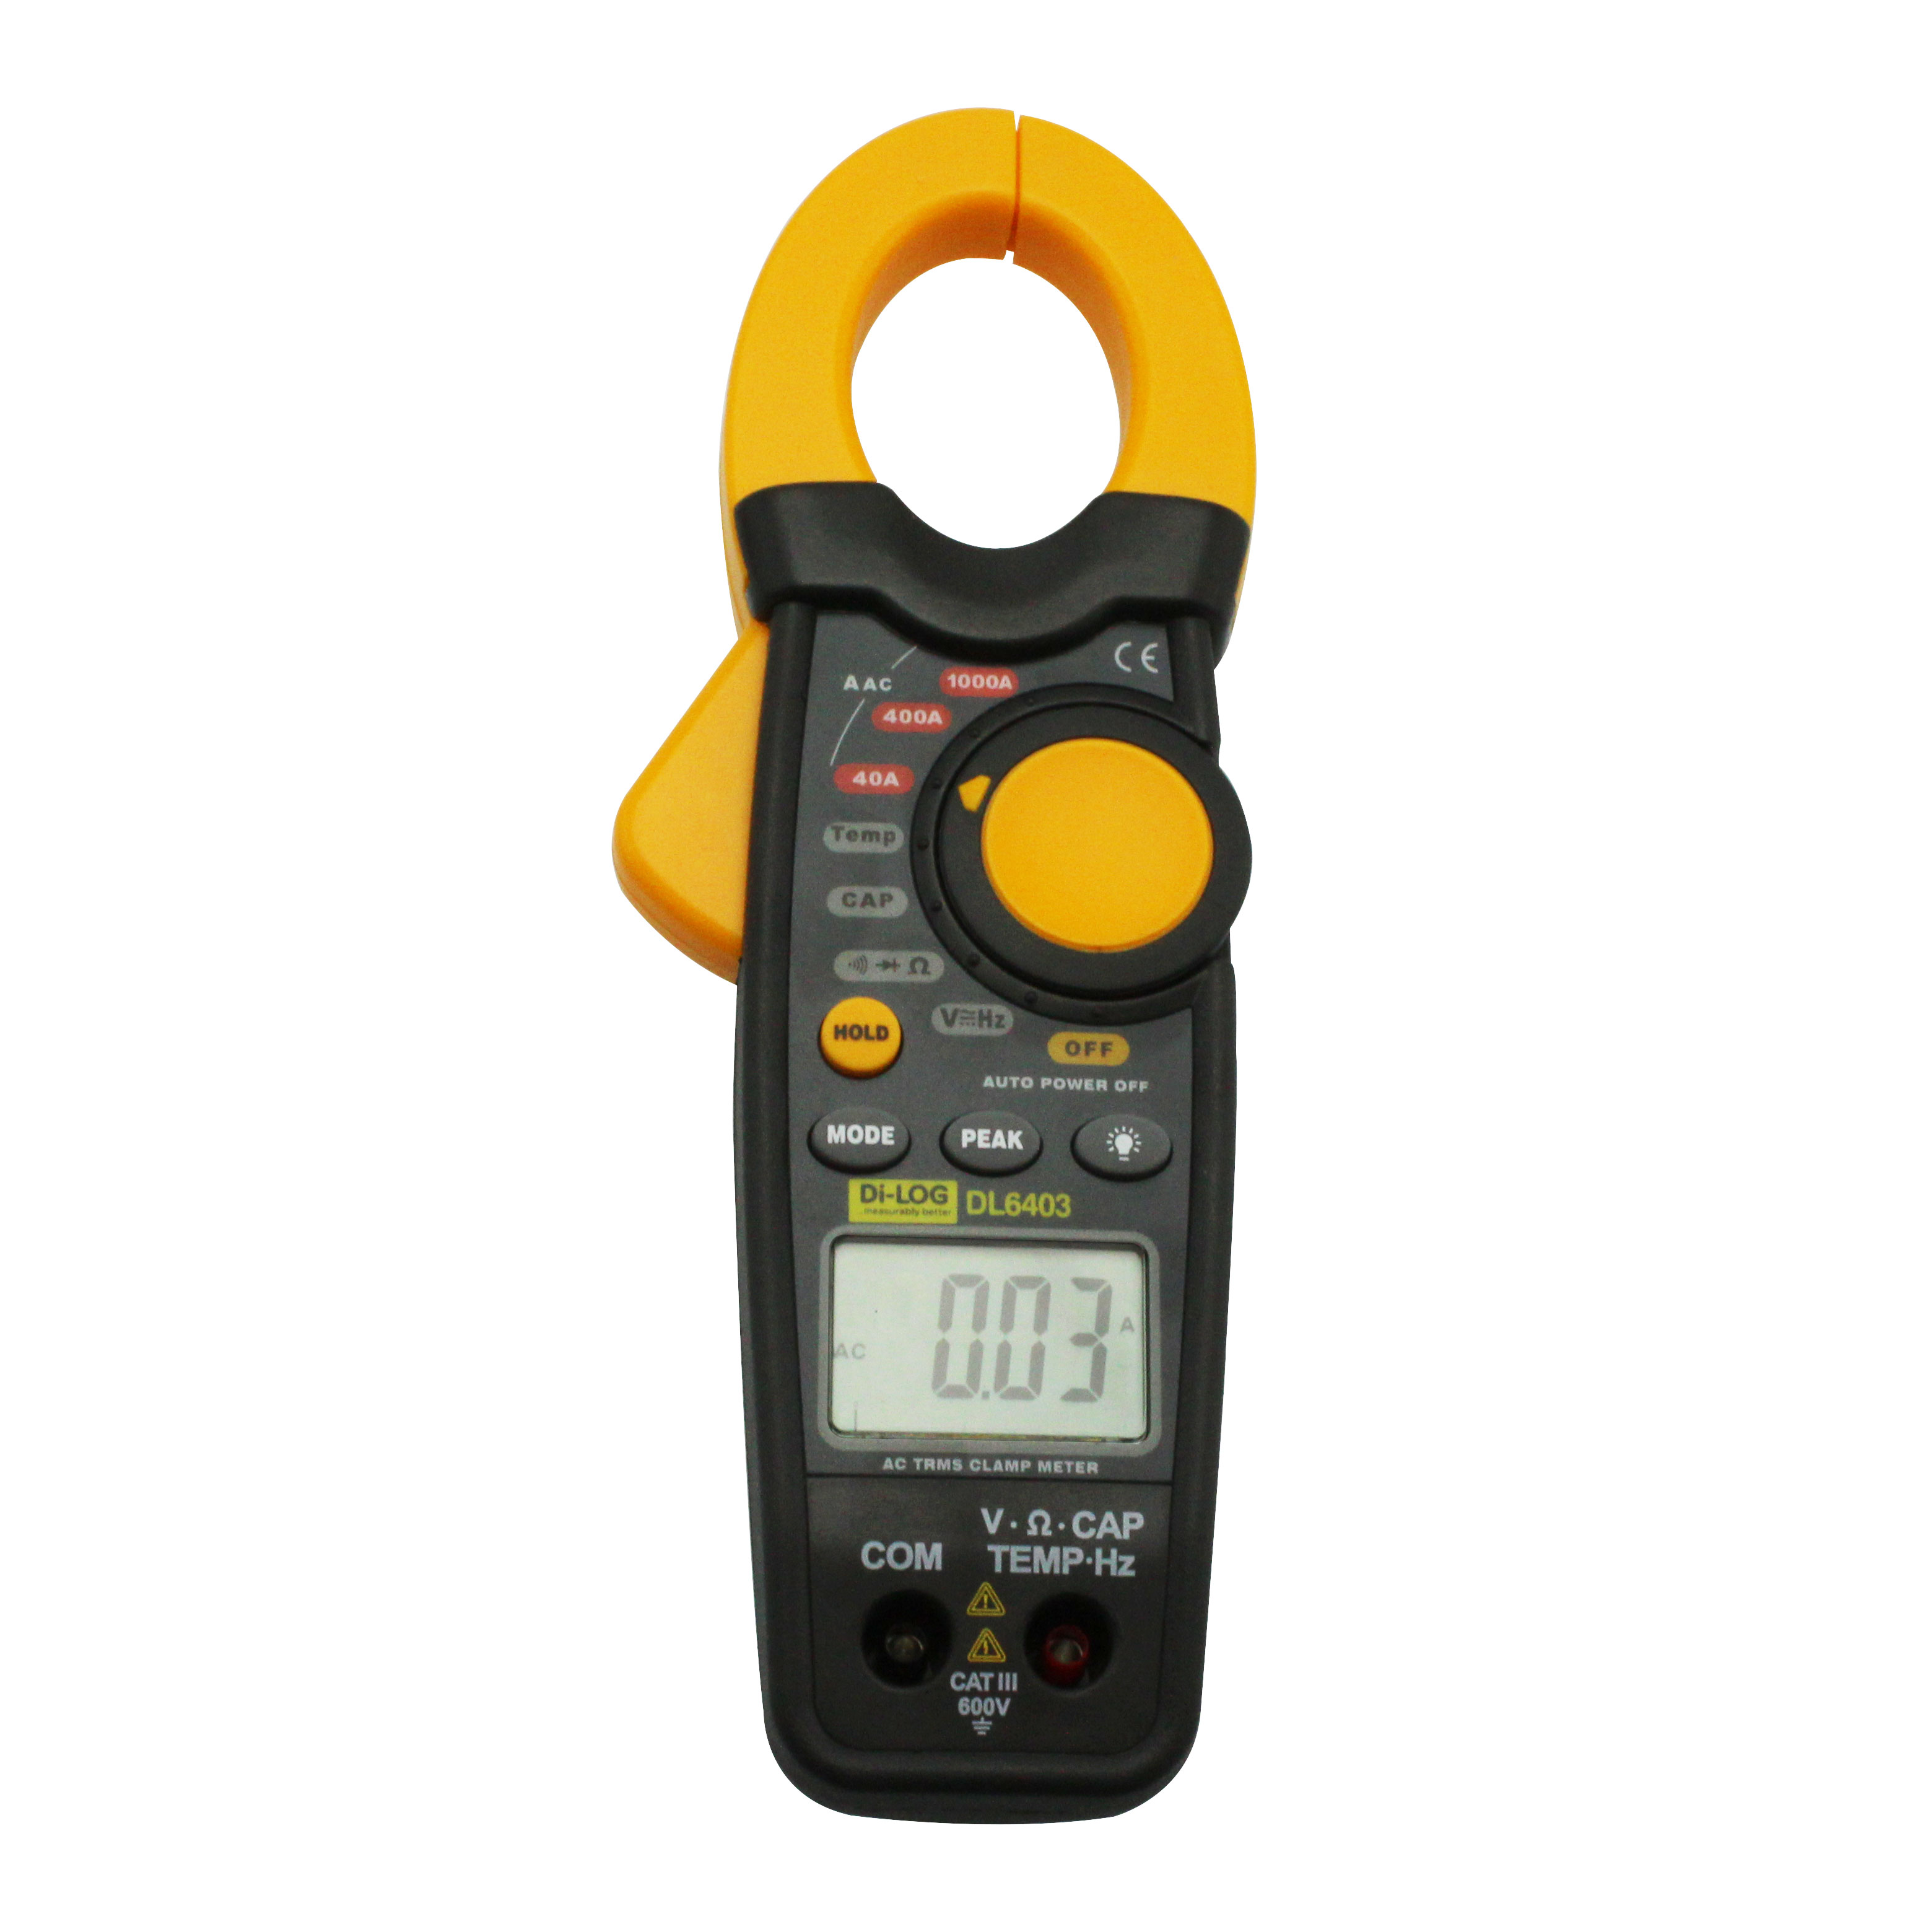 Dilog DL6403 1000A True RMS AC/DC Clamp Meter